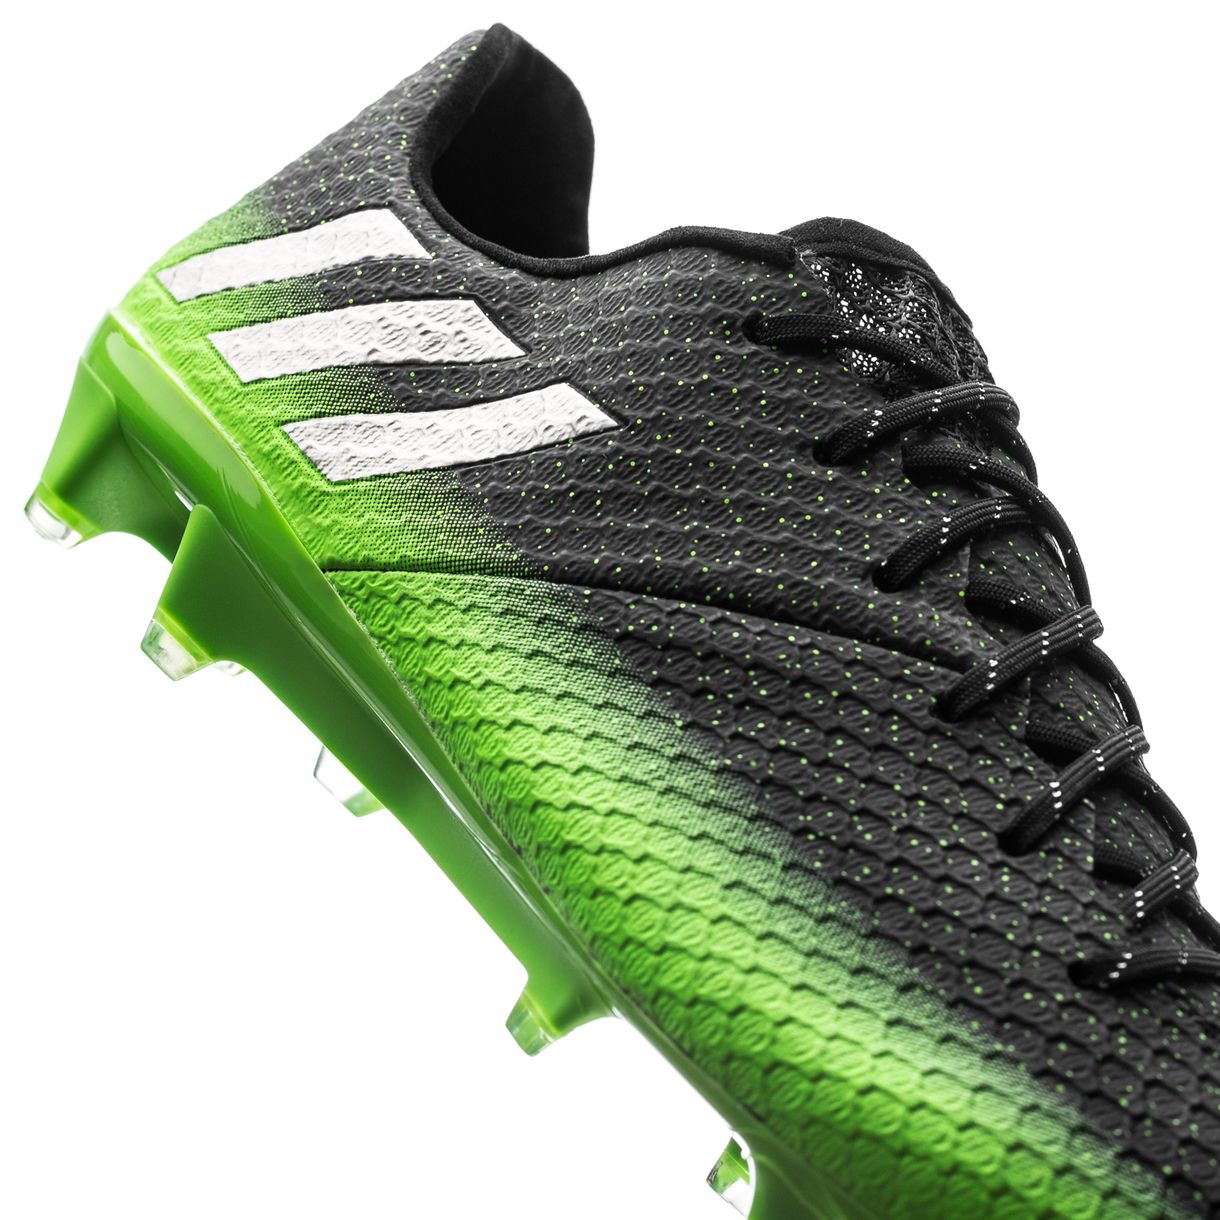 adidas 16.1 messi space dust